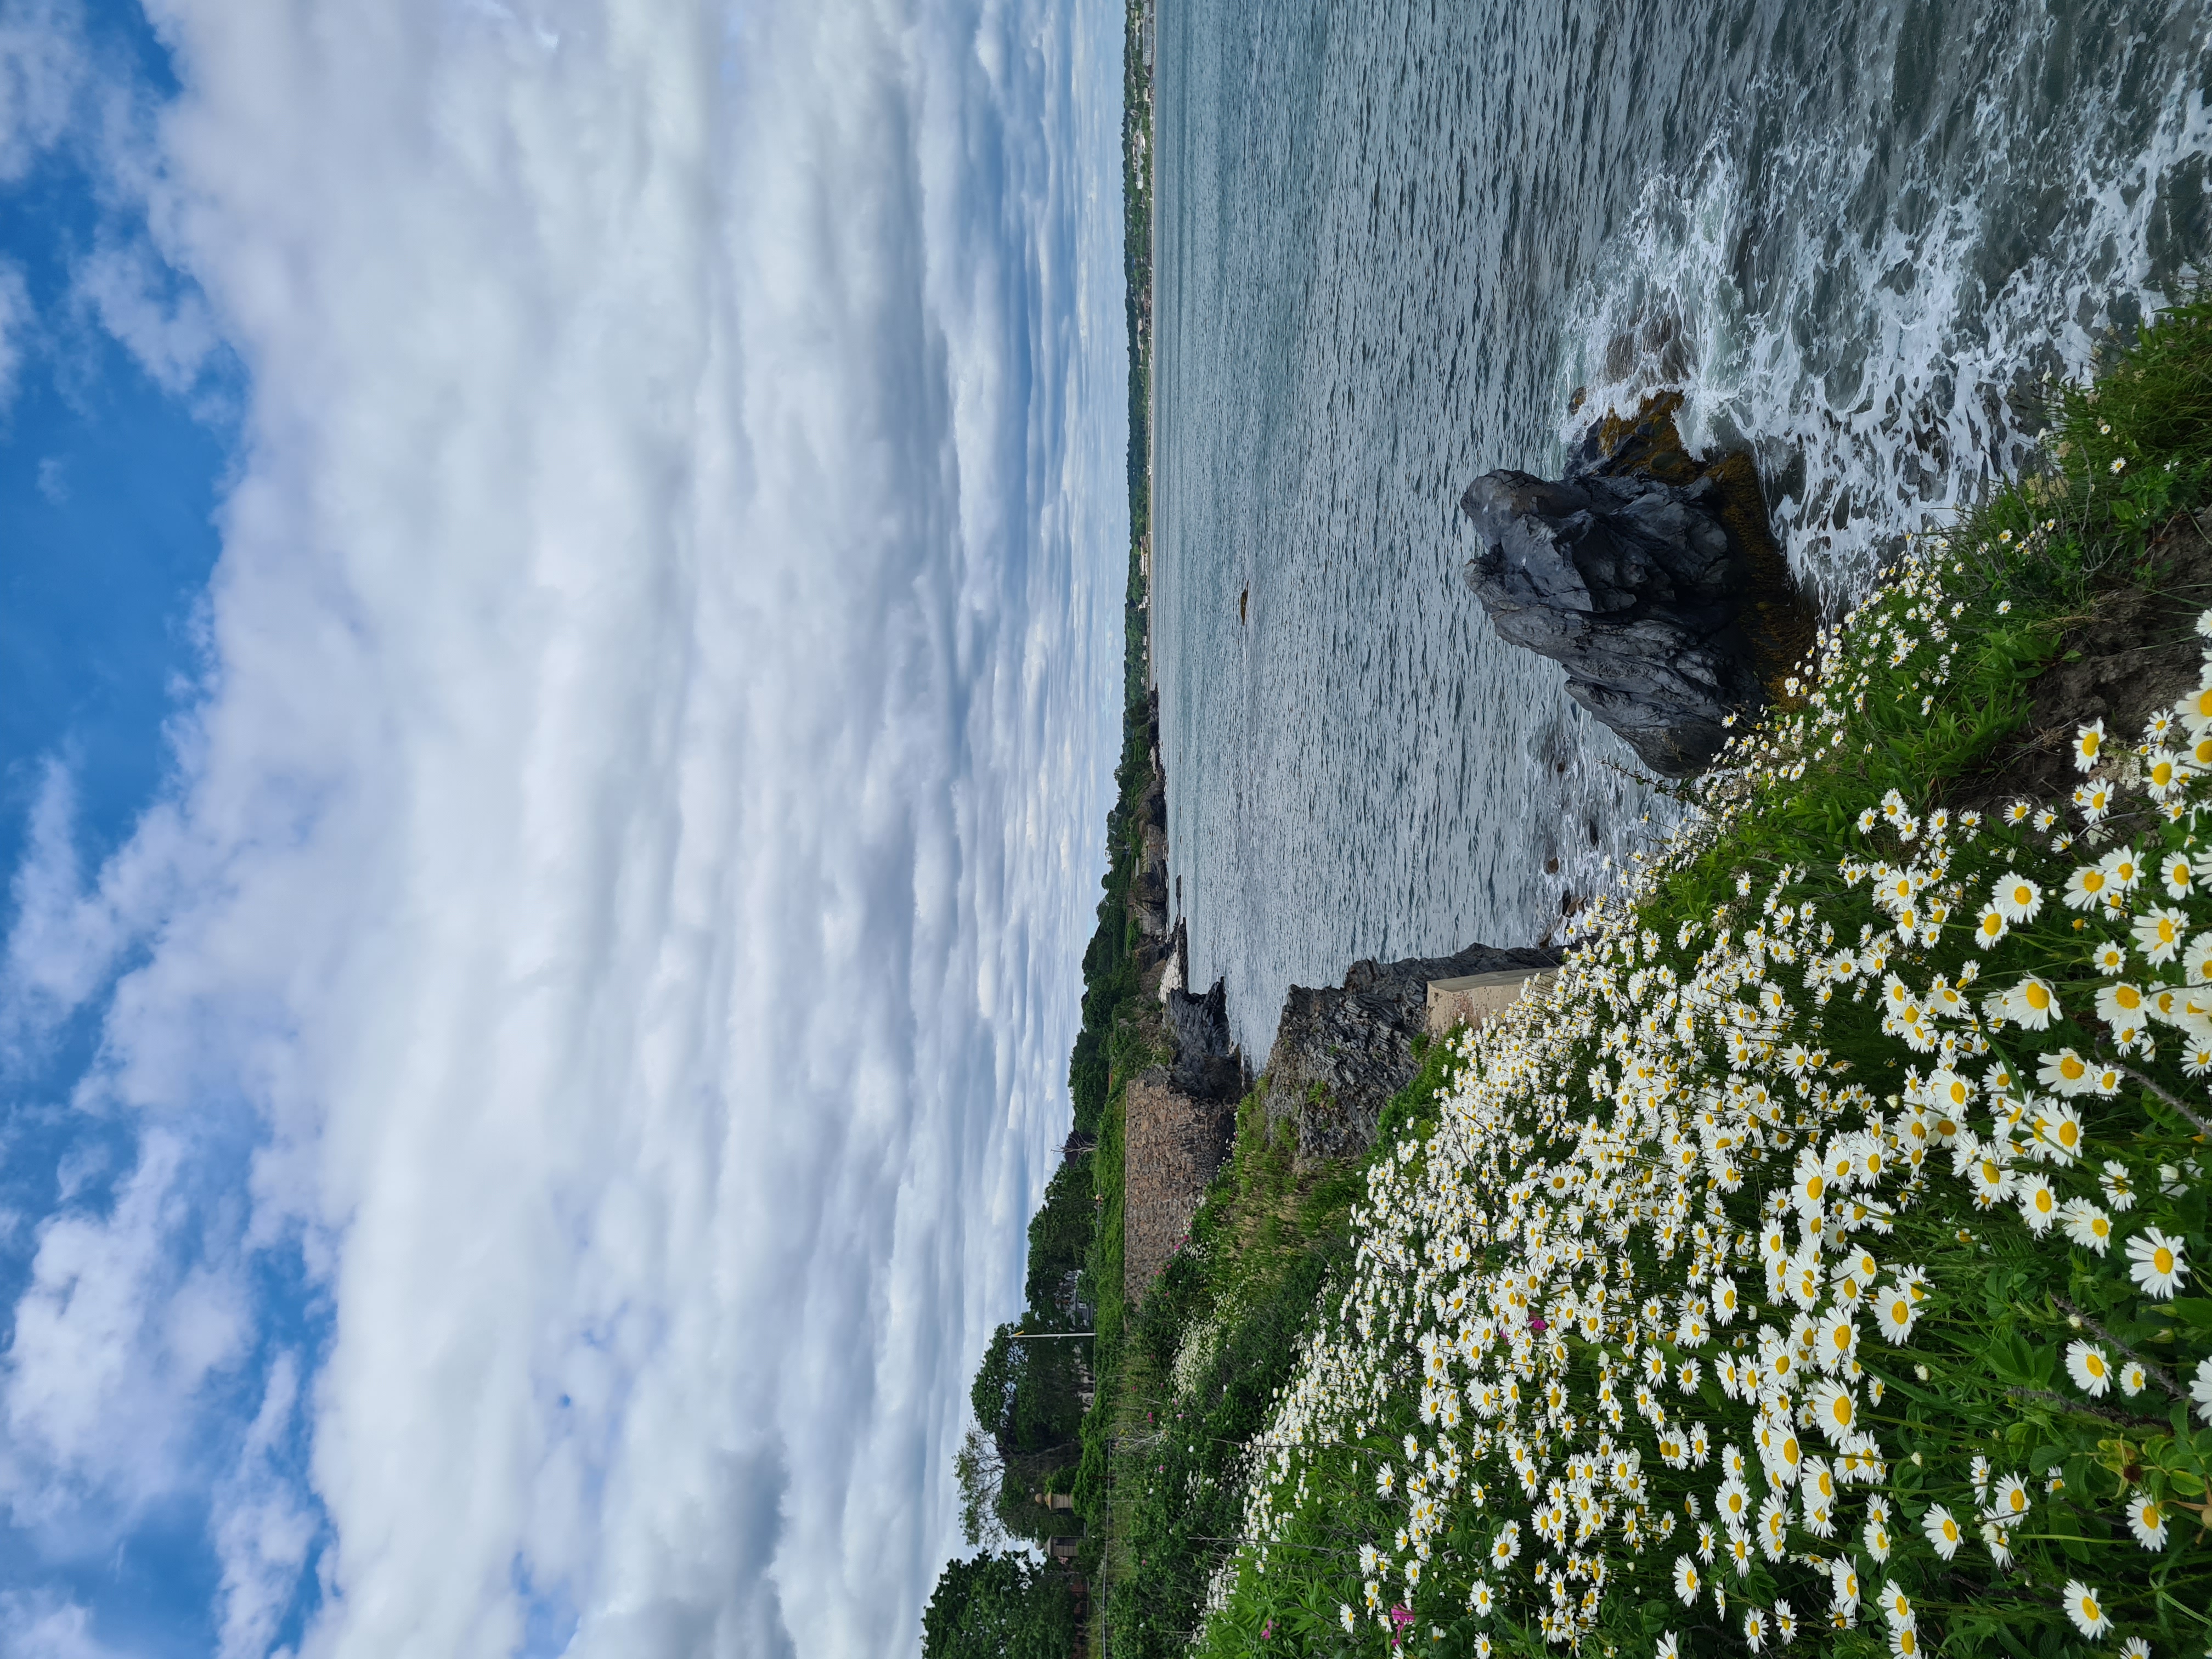 A patch of daisies overlooking the sea